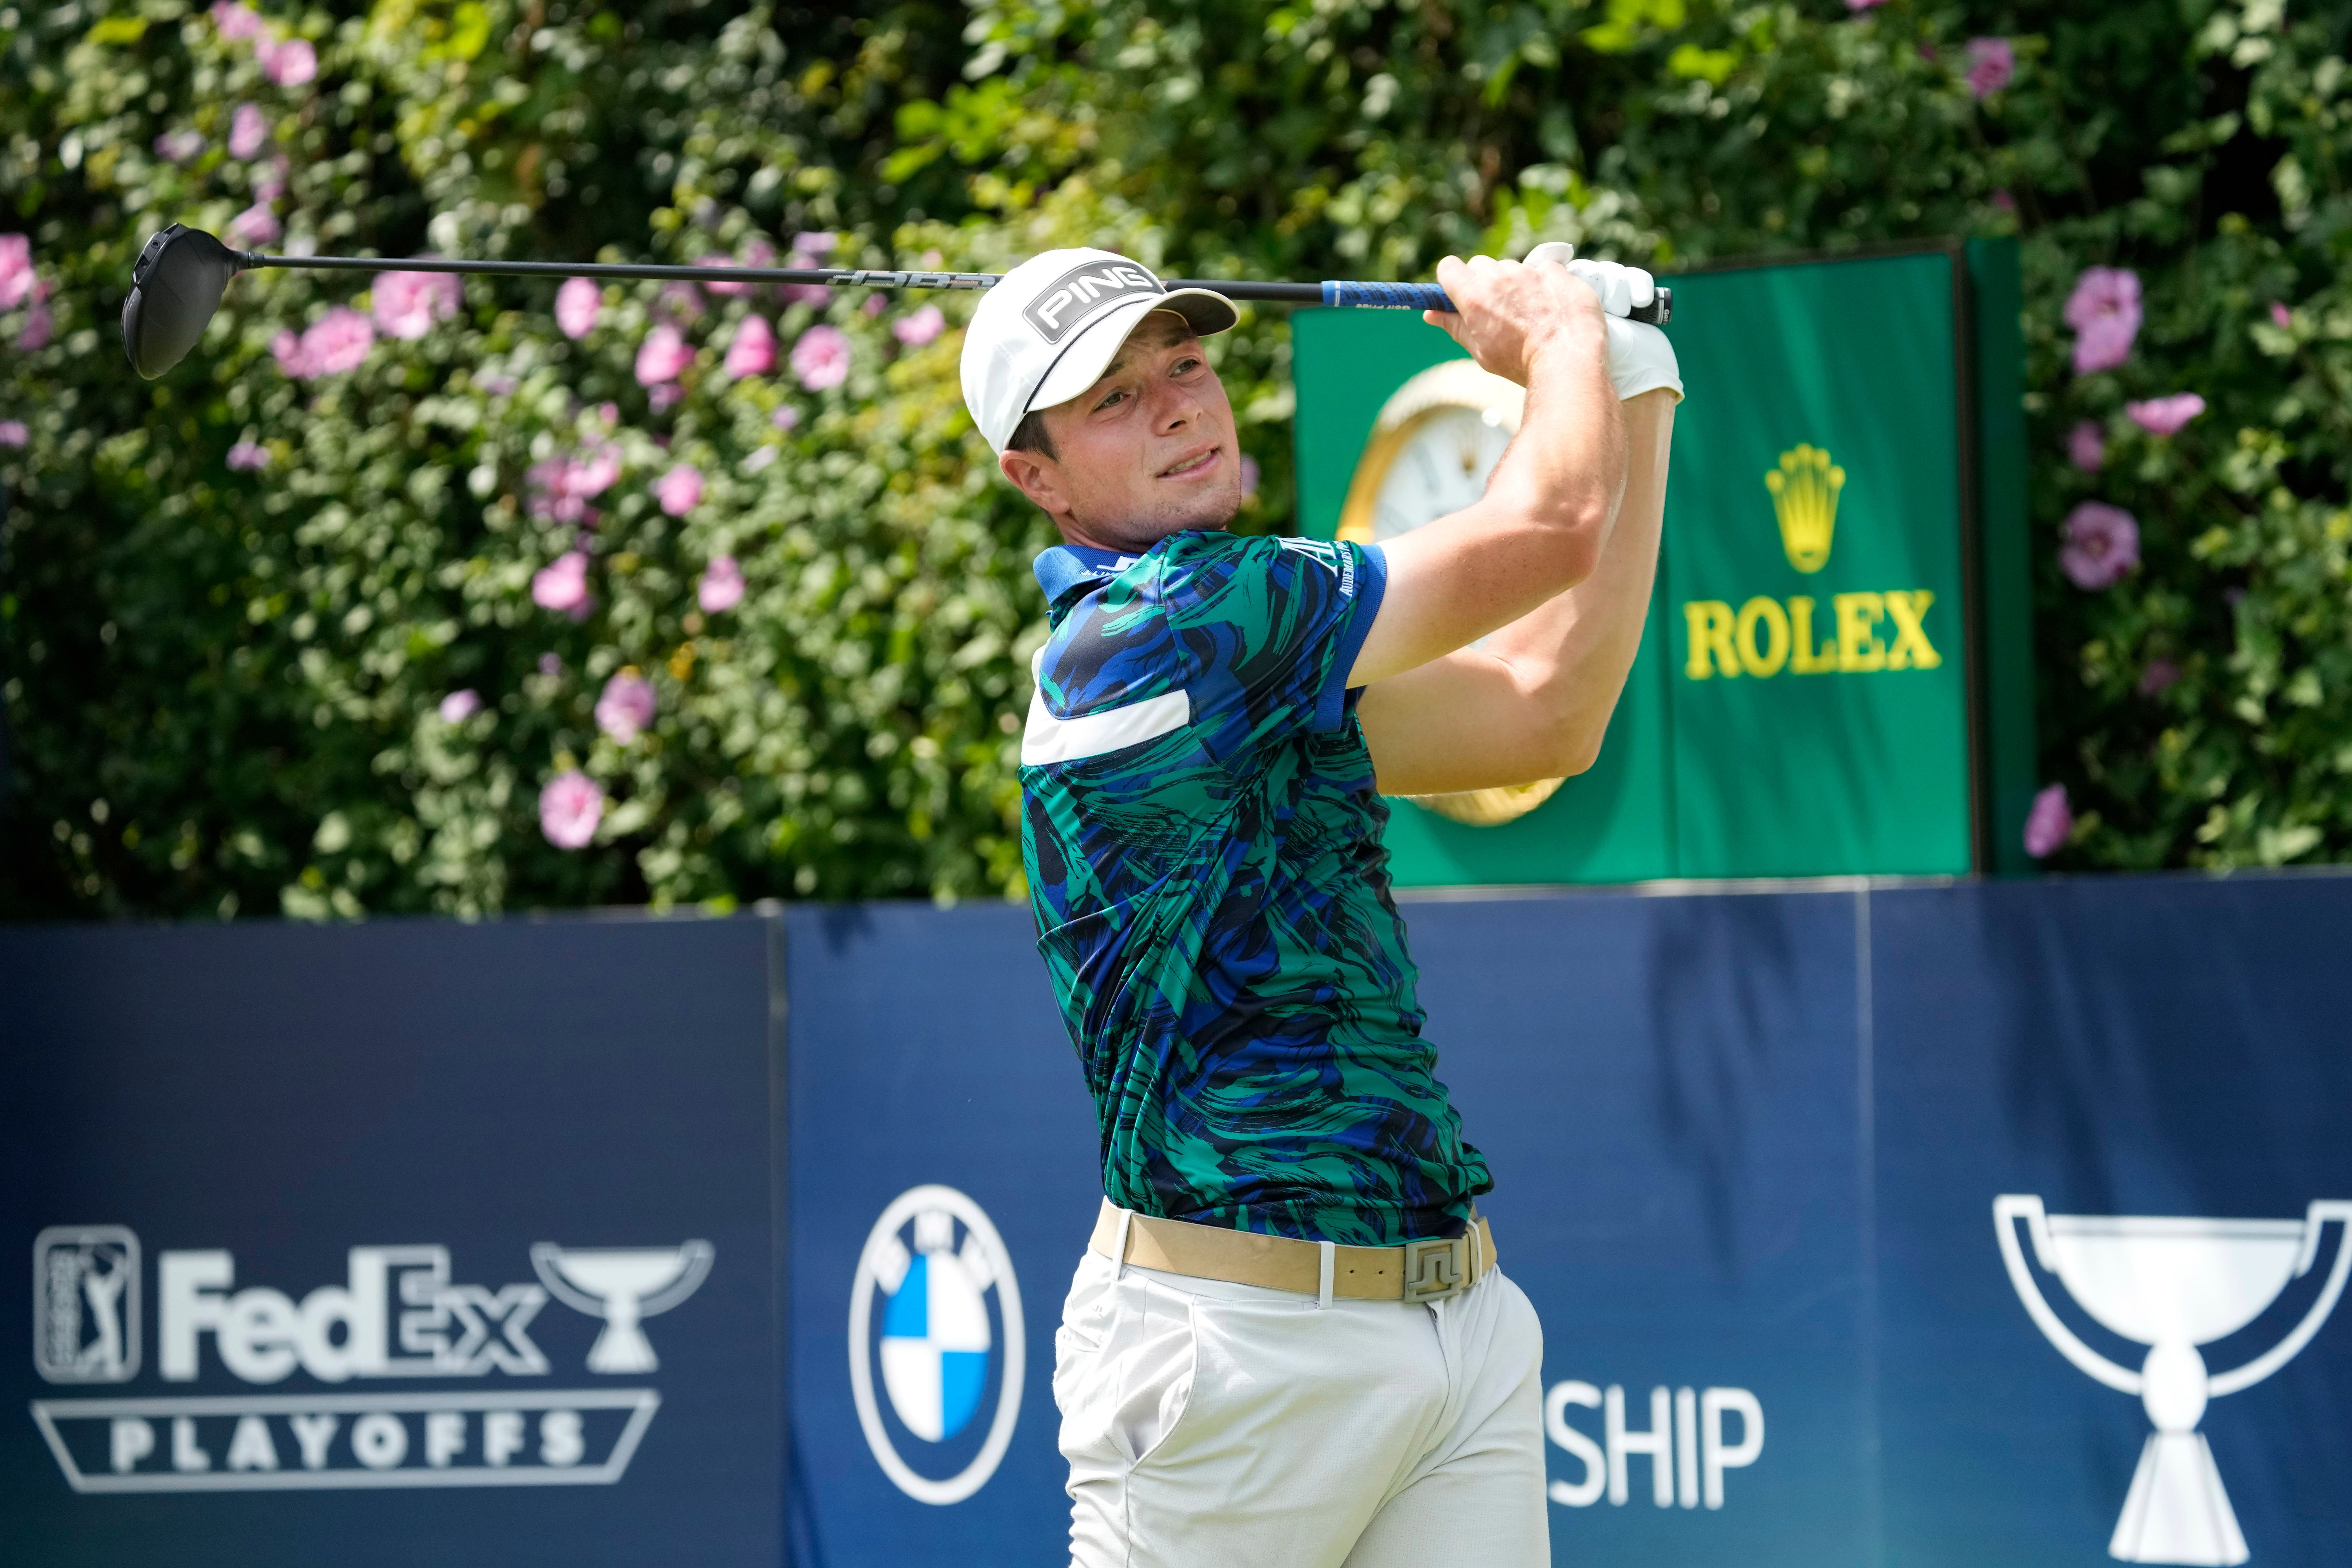 Hovland heads to the Tour Championship next week with a real chance of winning the FedEx Cup